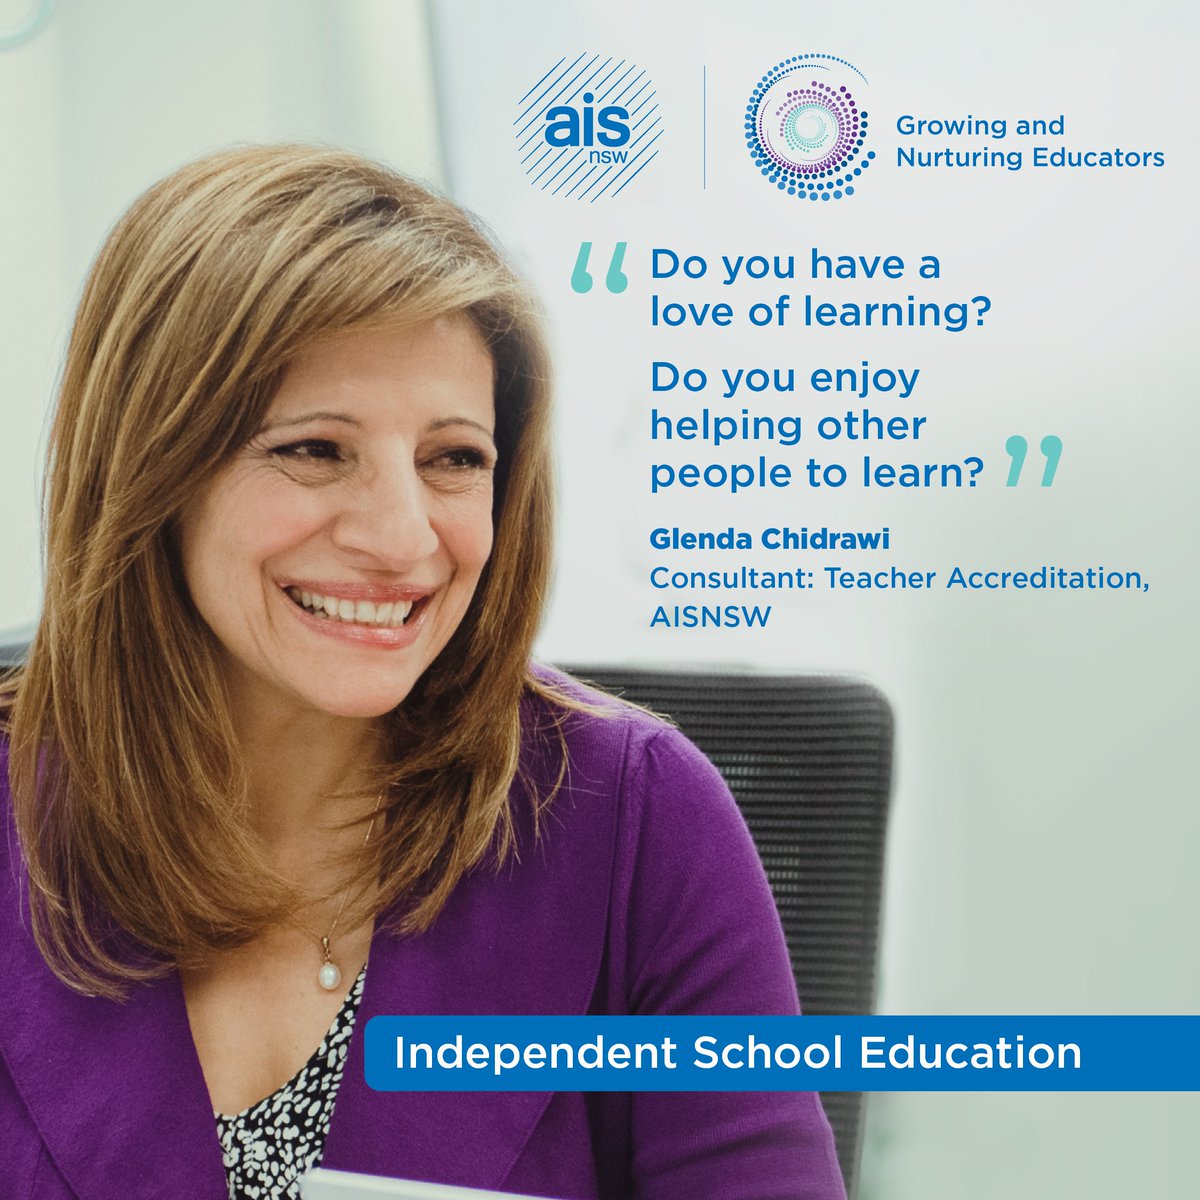 Thinking about becoming a teacher? Hear what AISNSW staff love about teaching. #MakeaDifference #GrowingNurturingEducators
ow.ly/sucq50PXrEL